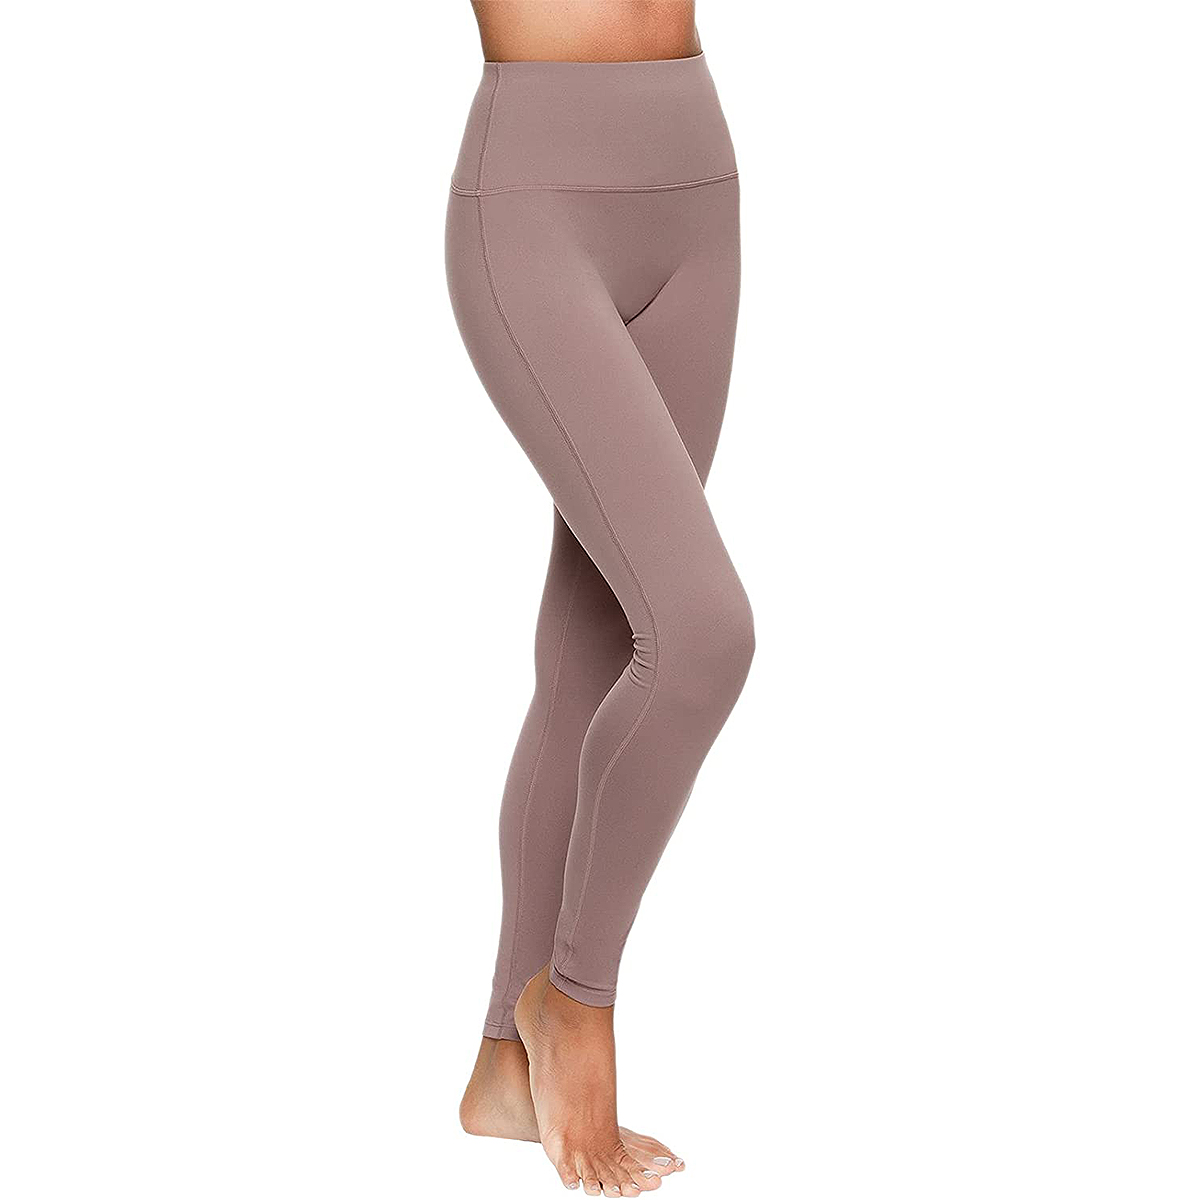 These $21 Homma Compression Leggings Have Almost 2,000 5-Star Amazon  Reviews | Pulse Nigeria